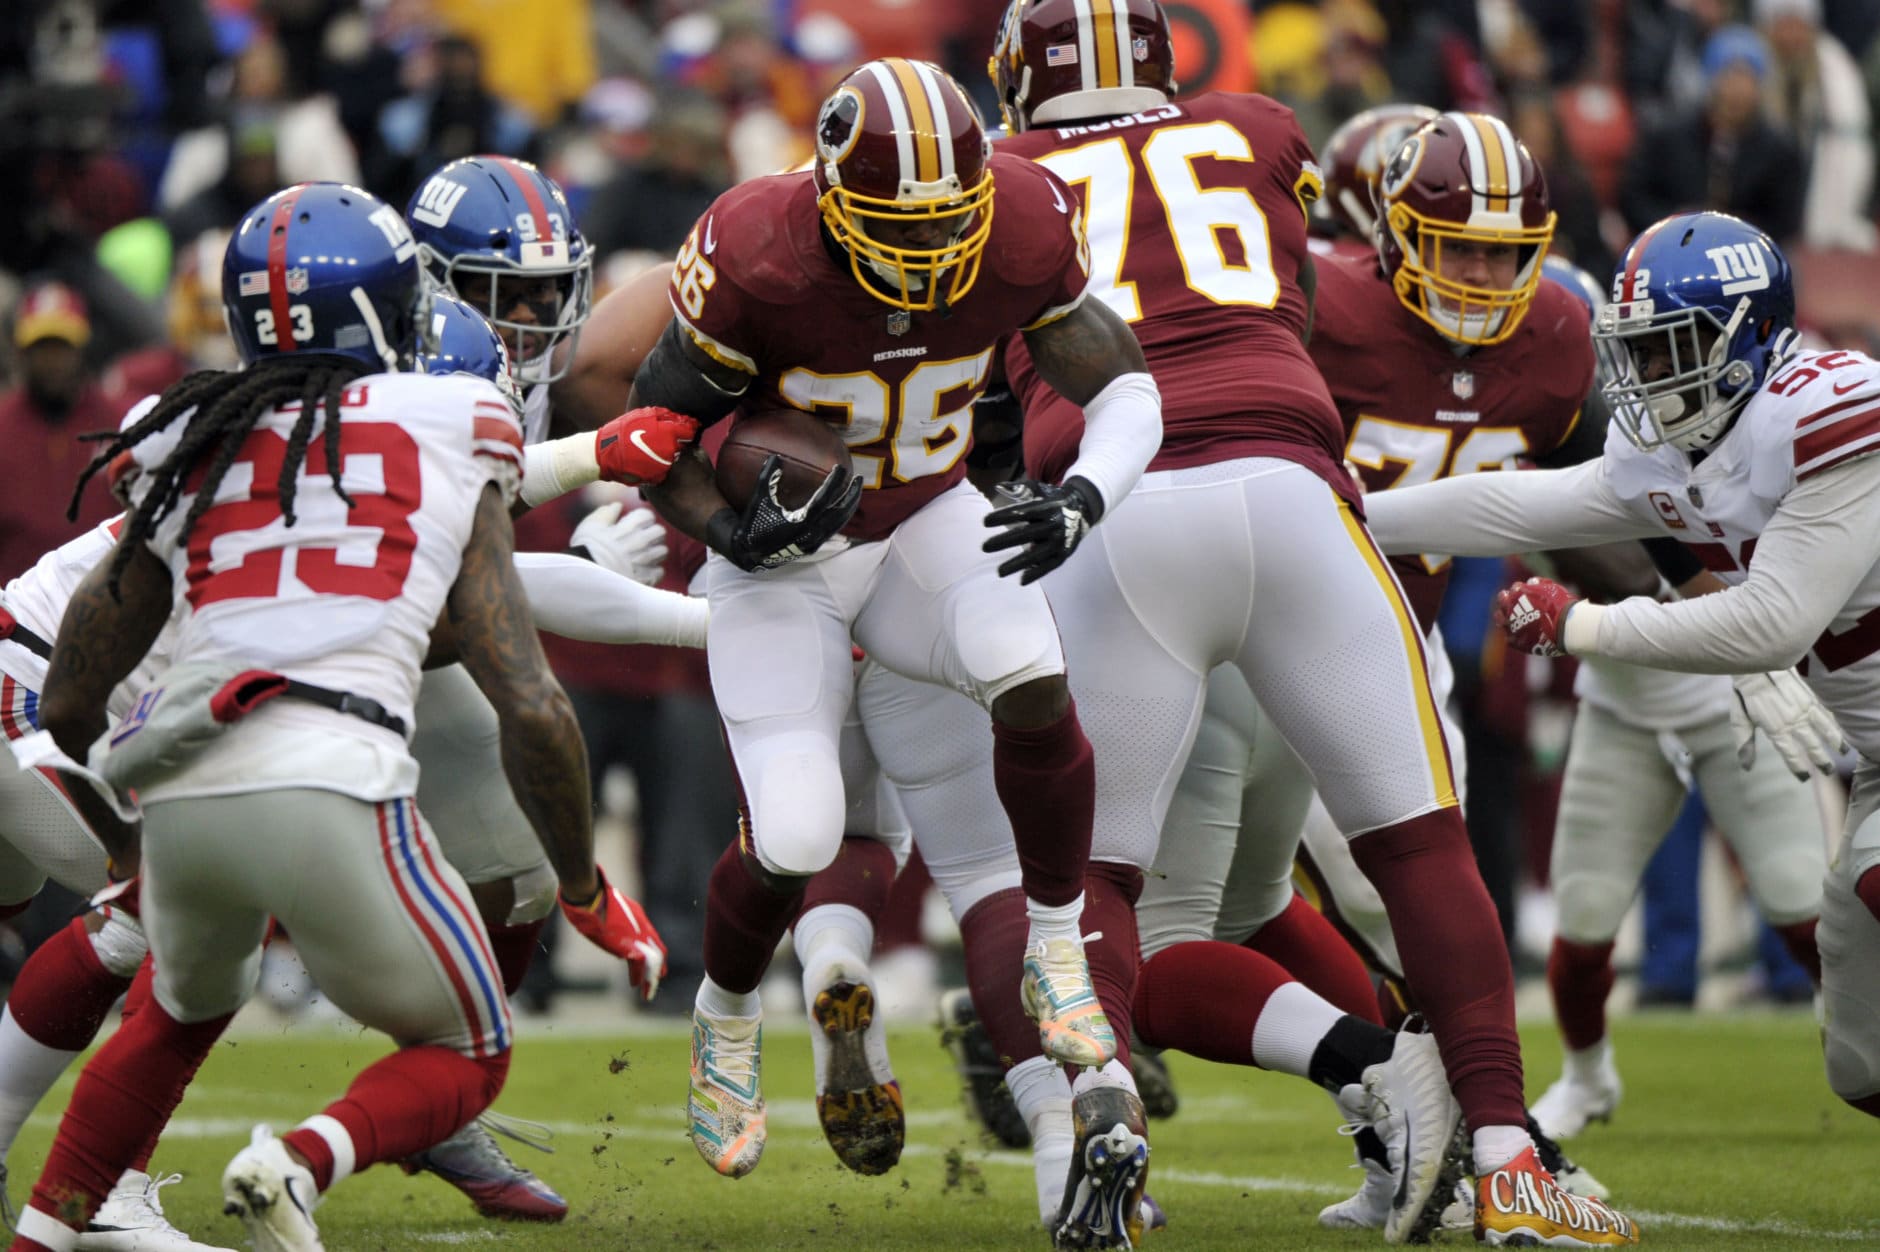 Washington Redskins running back Adrian Peterson (26) breaks through the line as New York Giants cornerback B.W. Webb (23) moves in, during the first half of an NFL football game Sunday, Dec. 9, 2018, in Landover, Md. (AP Photo/Mark Tenally)